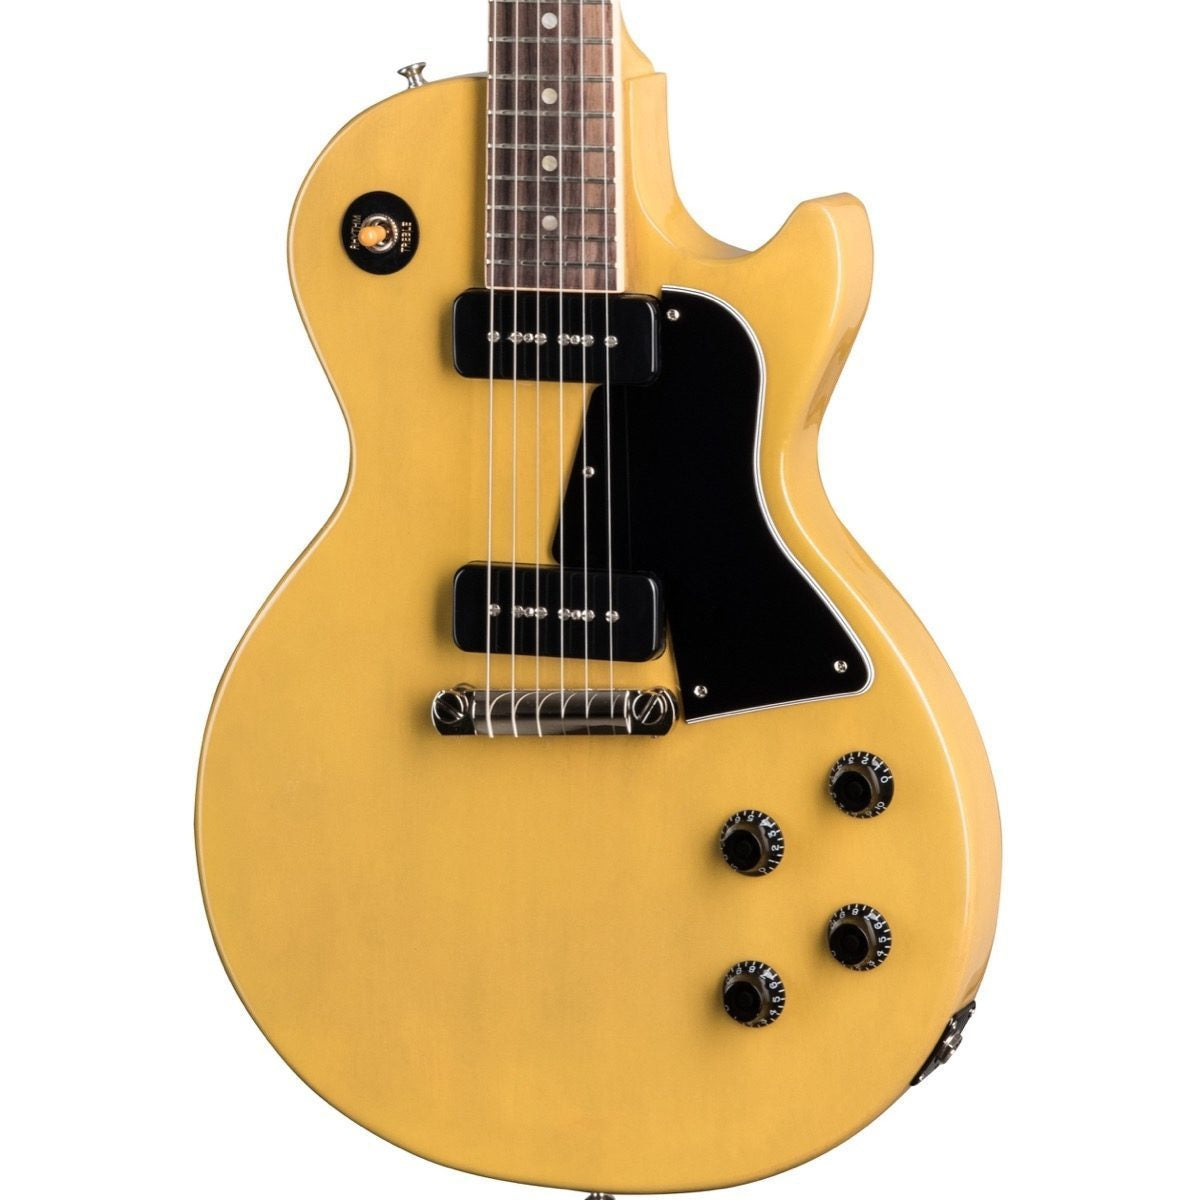 Gibson Les Paul Special Electric Guitar, TV Yellow